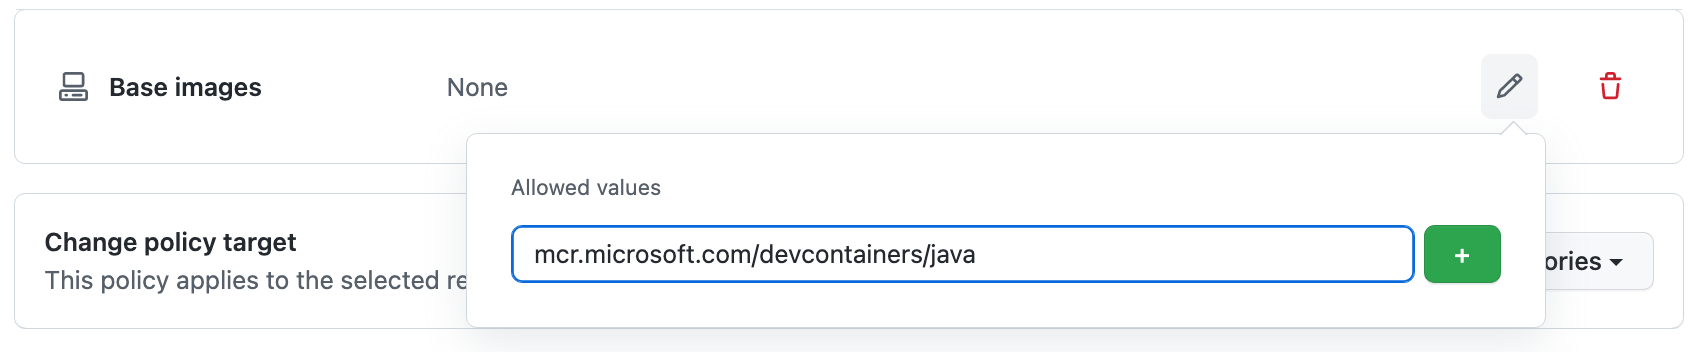 Screenshot of the URL "mcr.microsoft.com/vscode/devcontainers/java" entered in the "Allowed values" field.